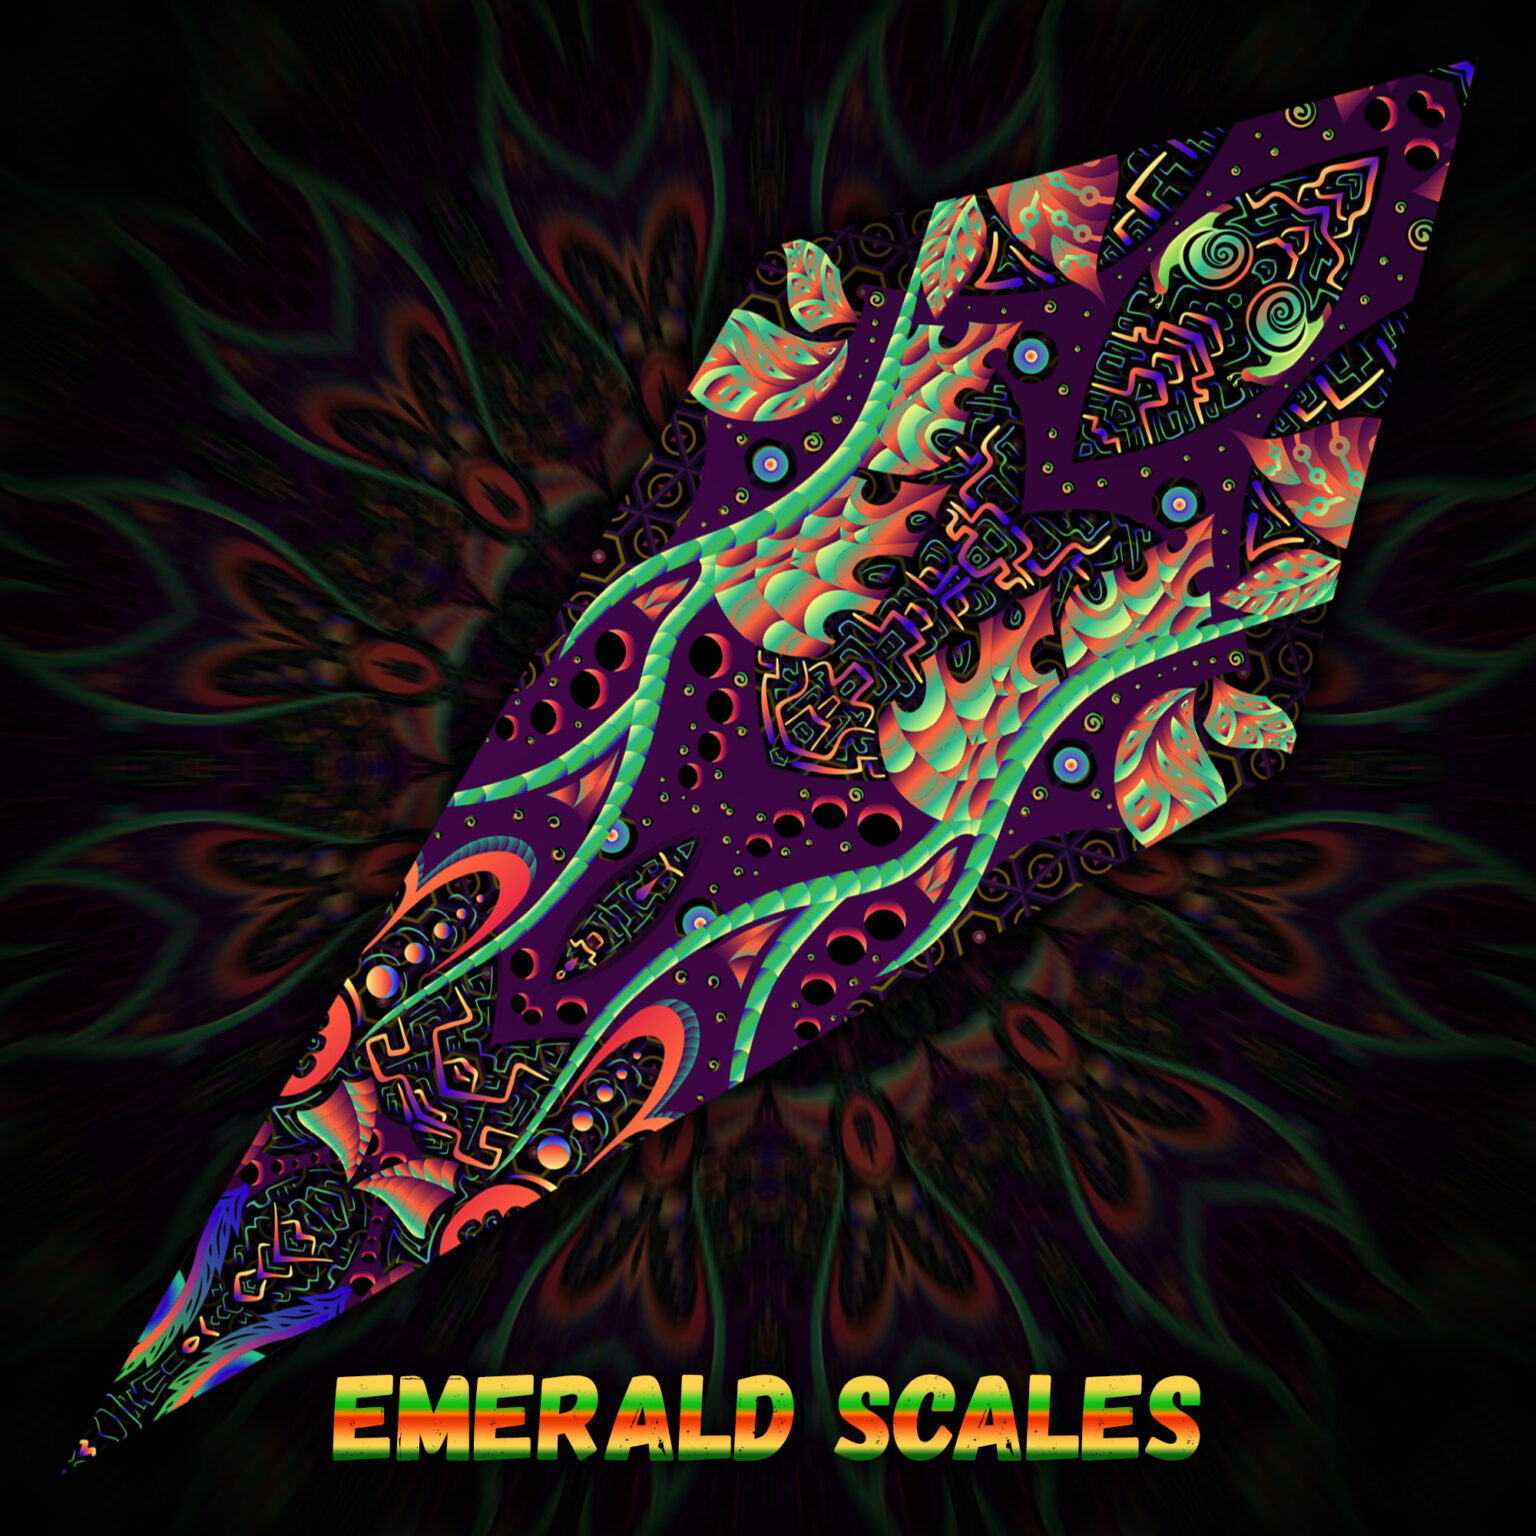 "Emerald Scales" UV-Petal Design Preview - "Jungle Snakes" Collection